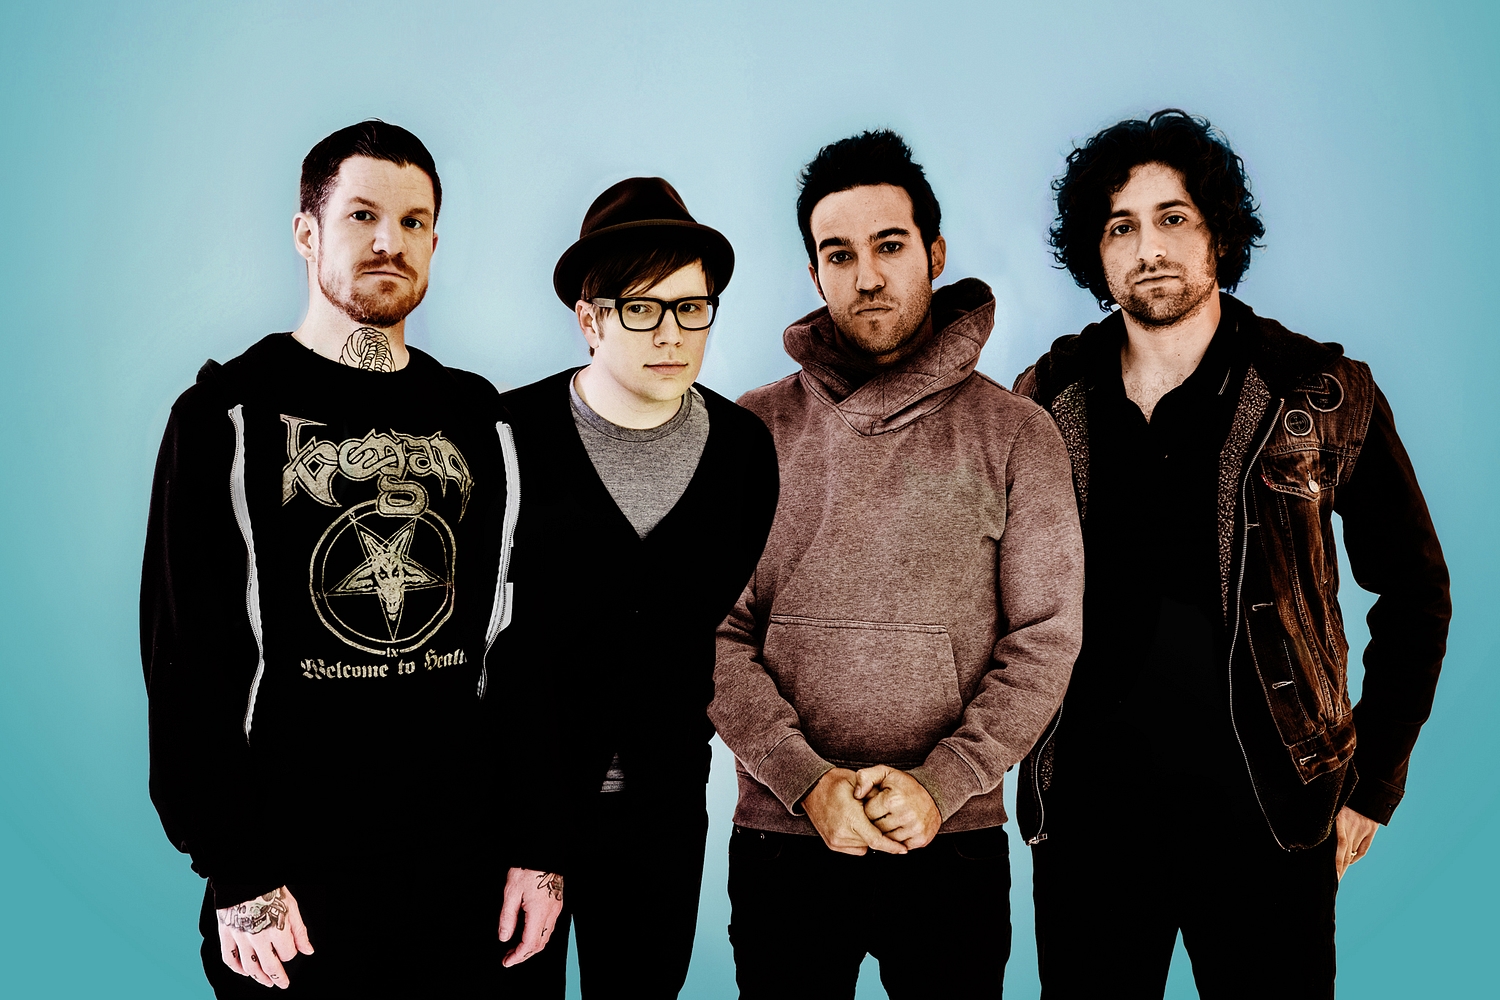 Fall Out Boy cover ‘I Wanna Be Like You’ from Jungle Book